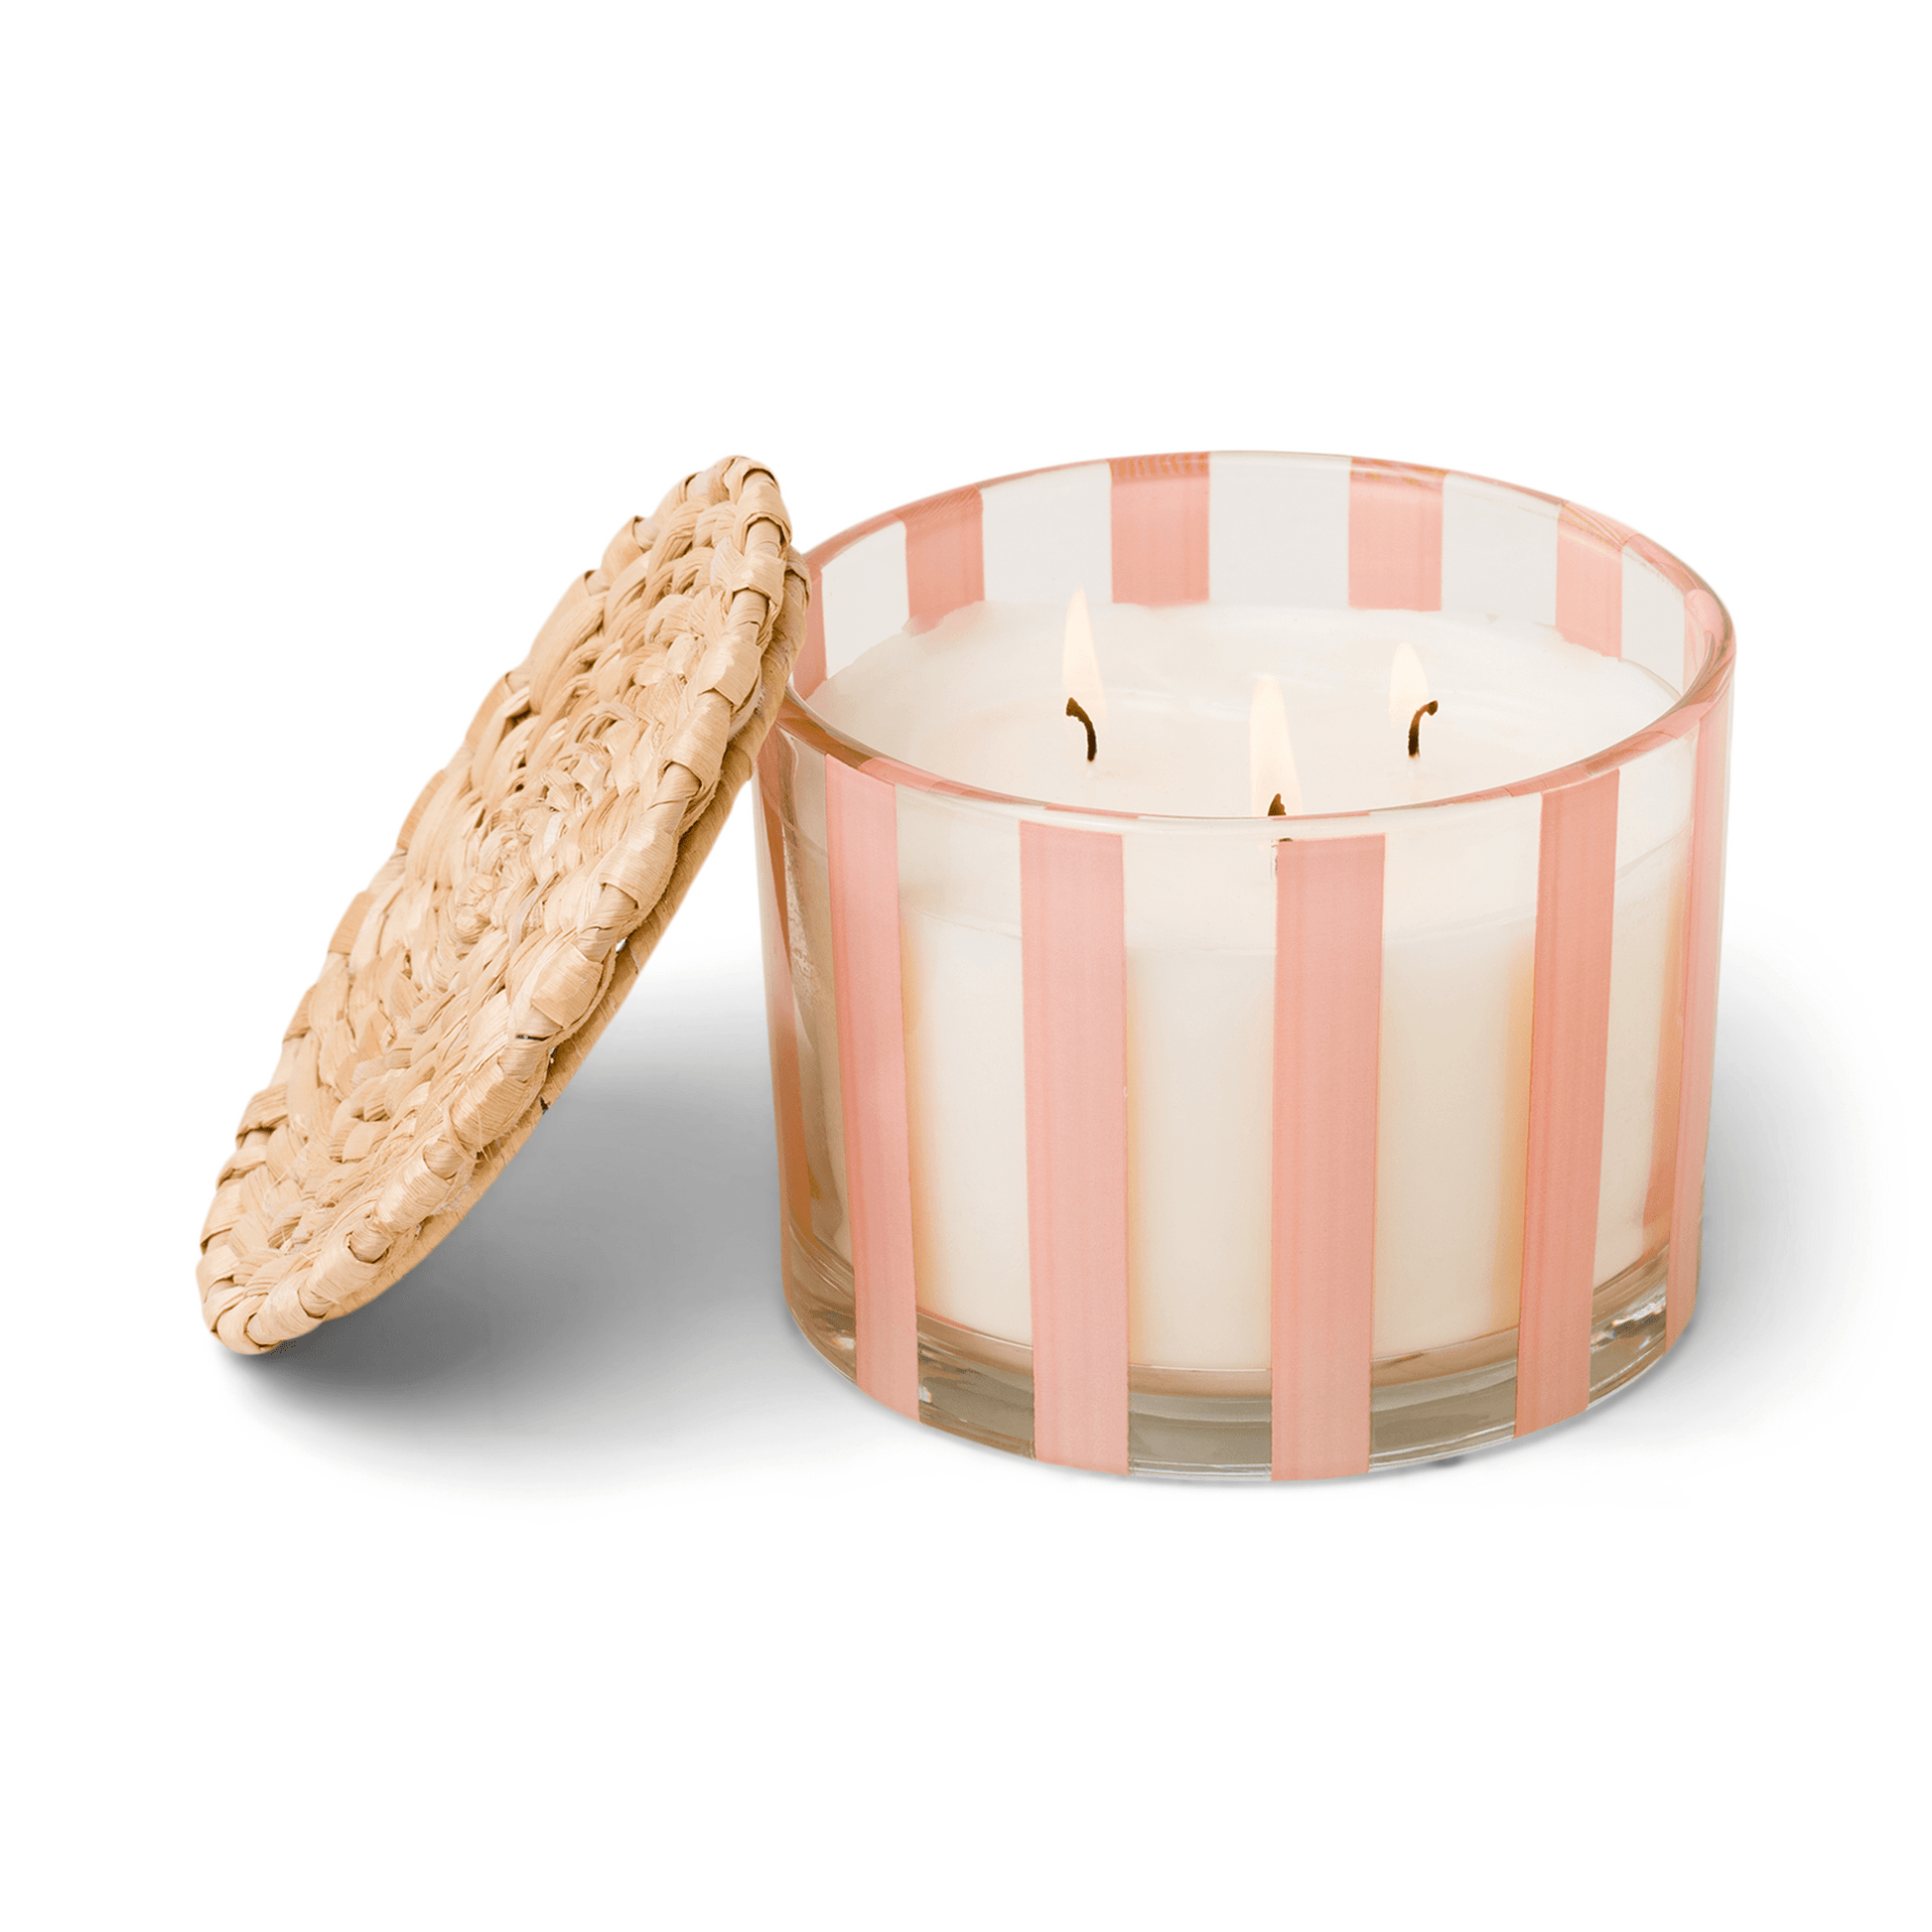 12 oz clear glass vessel with light pink stripes, white wax, and three wicks; a part of the Al Fresco collection; comes with woven rattan lid